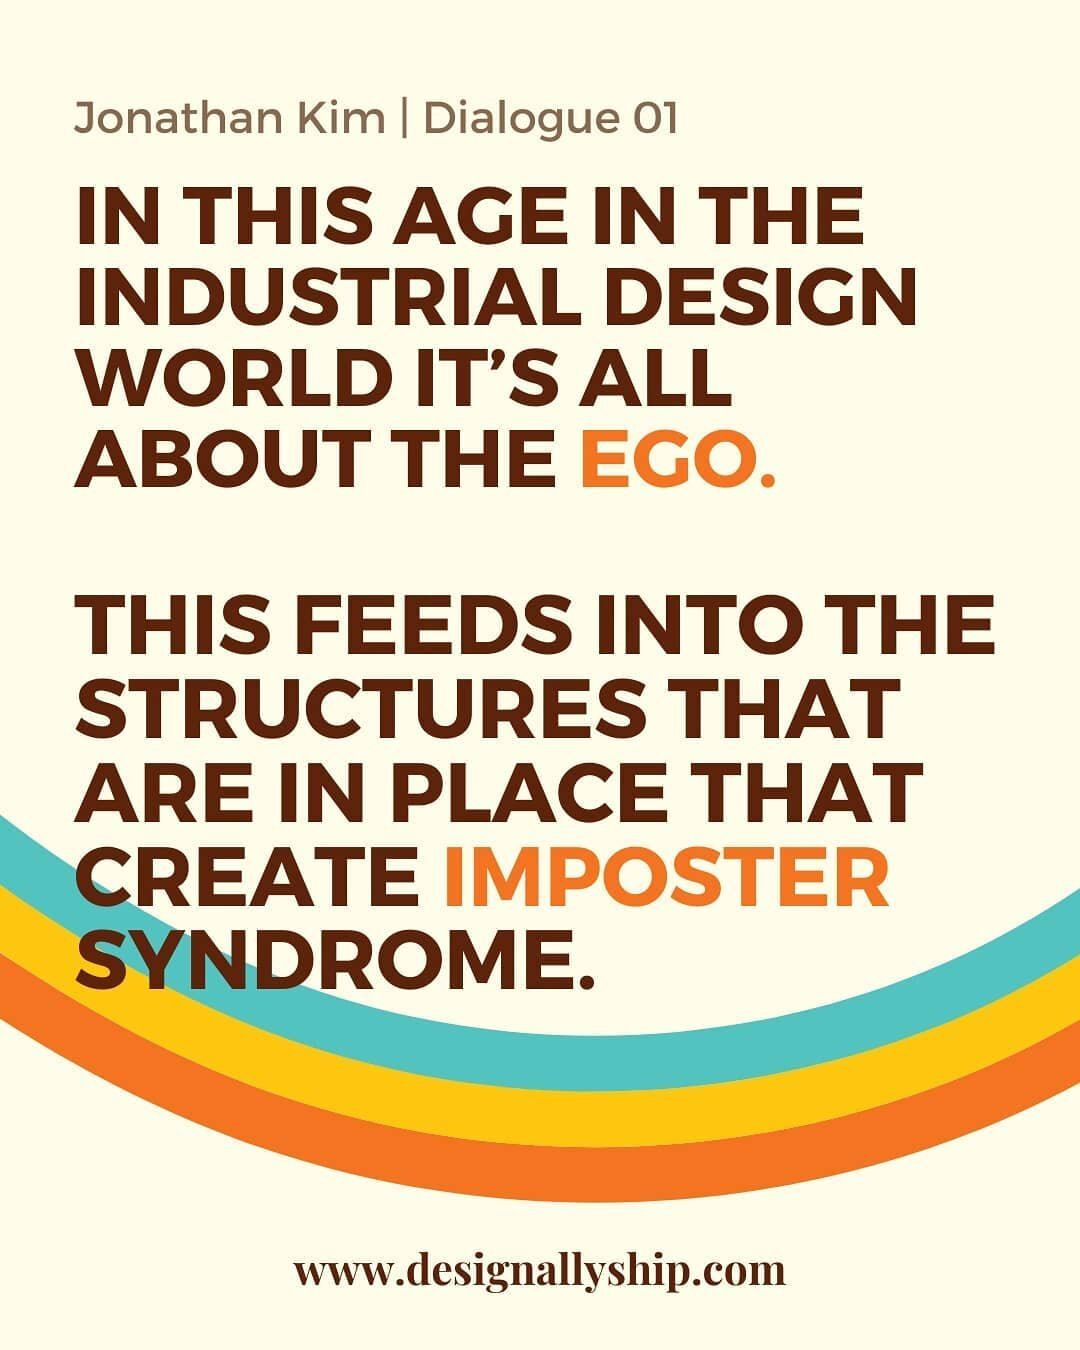 @id_jonathan shared these insights with us at our last Dialogues event with @our.being as we explored how identity intersects with imposter syndrome. One of the themes we encountered with Jonathan, @roxana_ghani and @lindustrial_/@was the way ego and